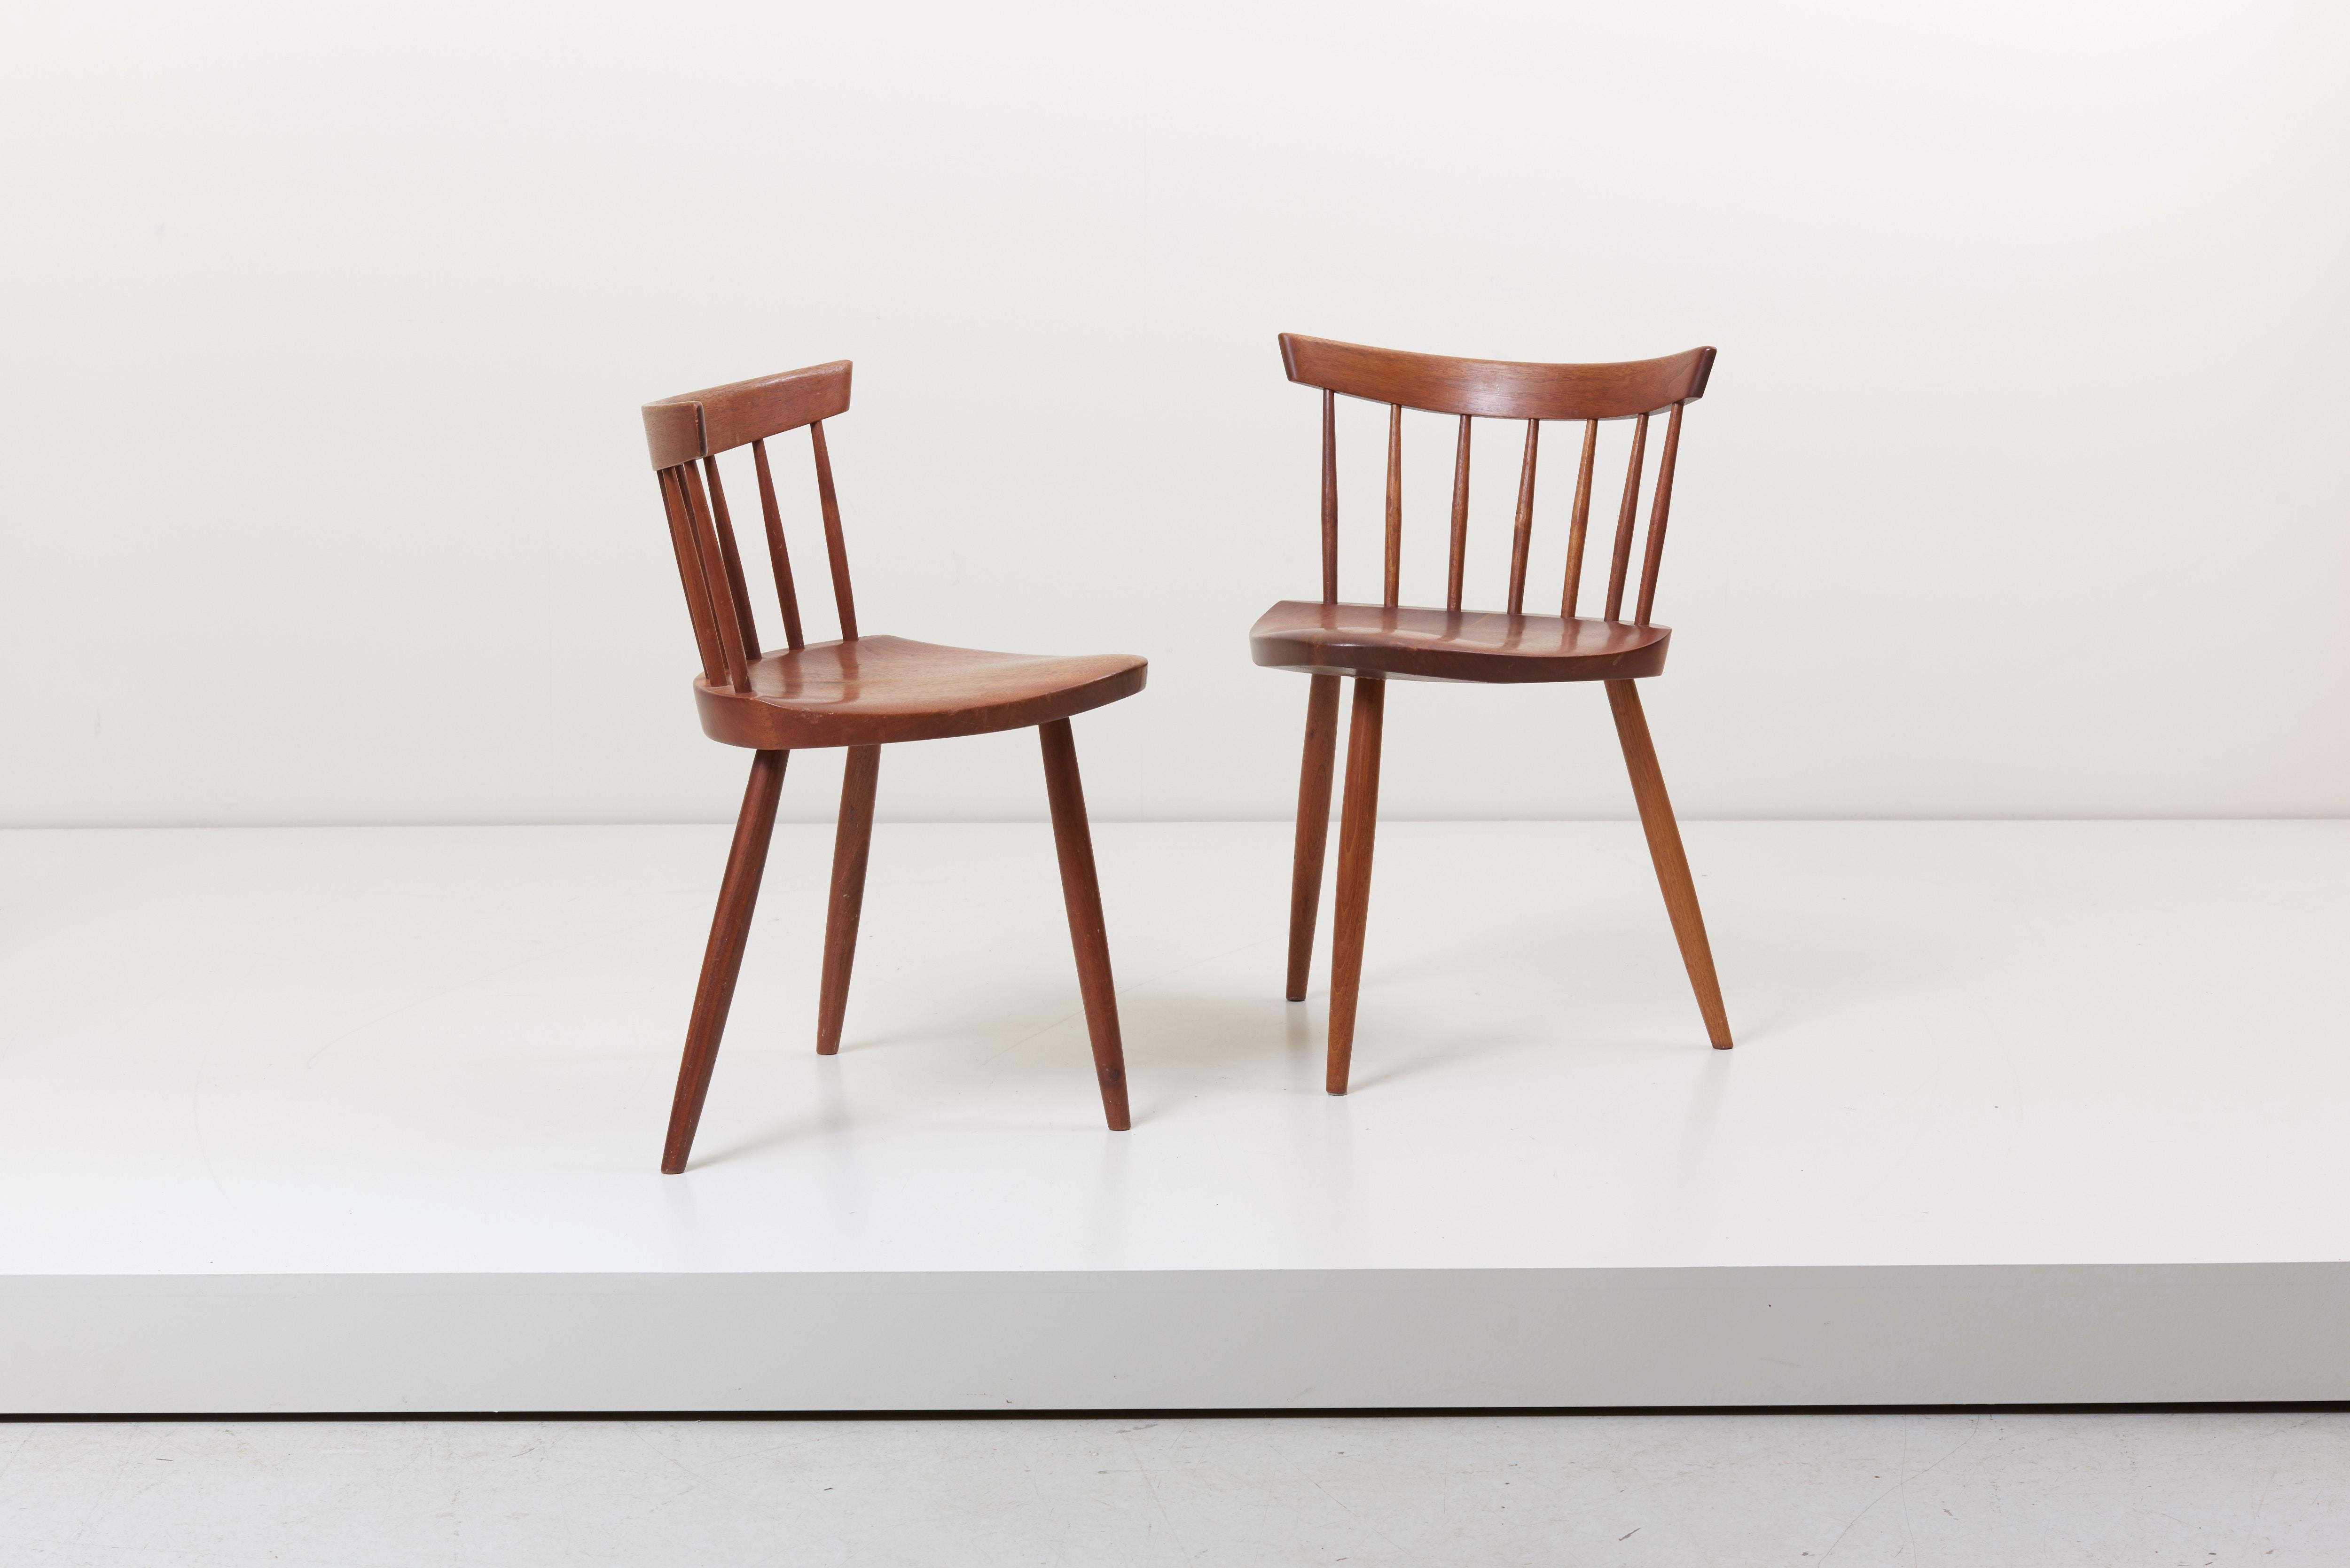 Vintage version of a pair of the Mira Chair by George Nakashima. The chairs are in walnut.
One bottom of the seat still shows lines and is marked with Showroom. Here is a statement from Mira Nakashima about this chair: All I can say for certain is